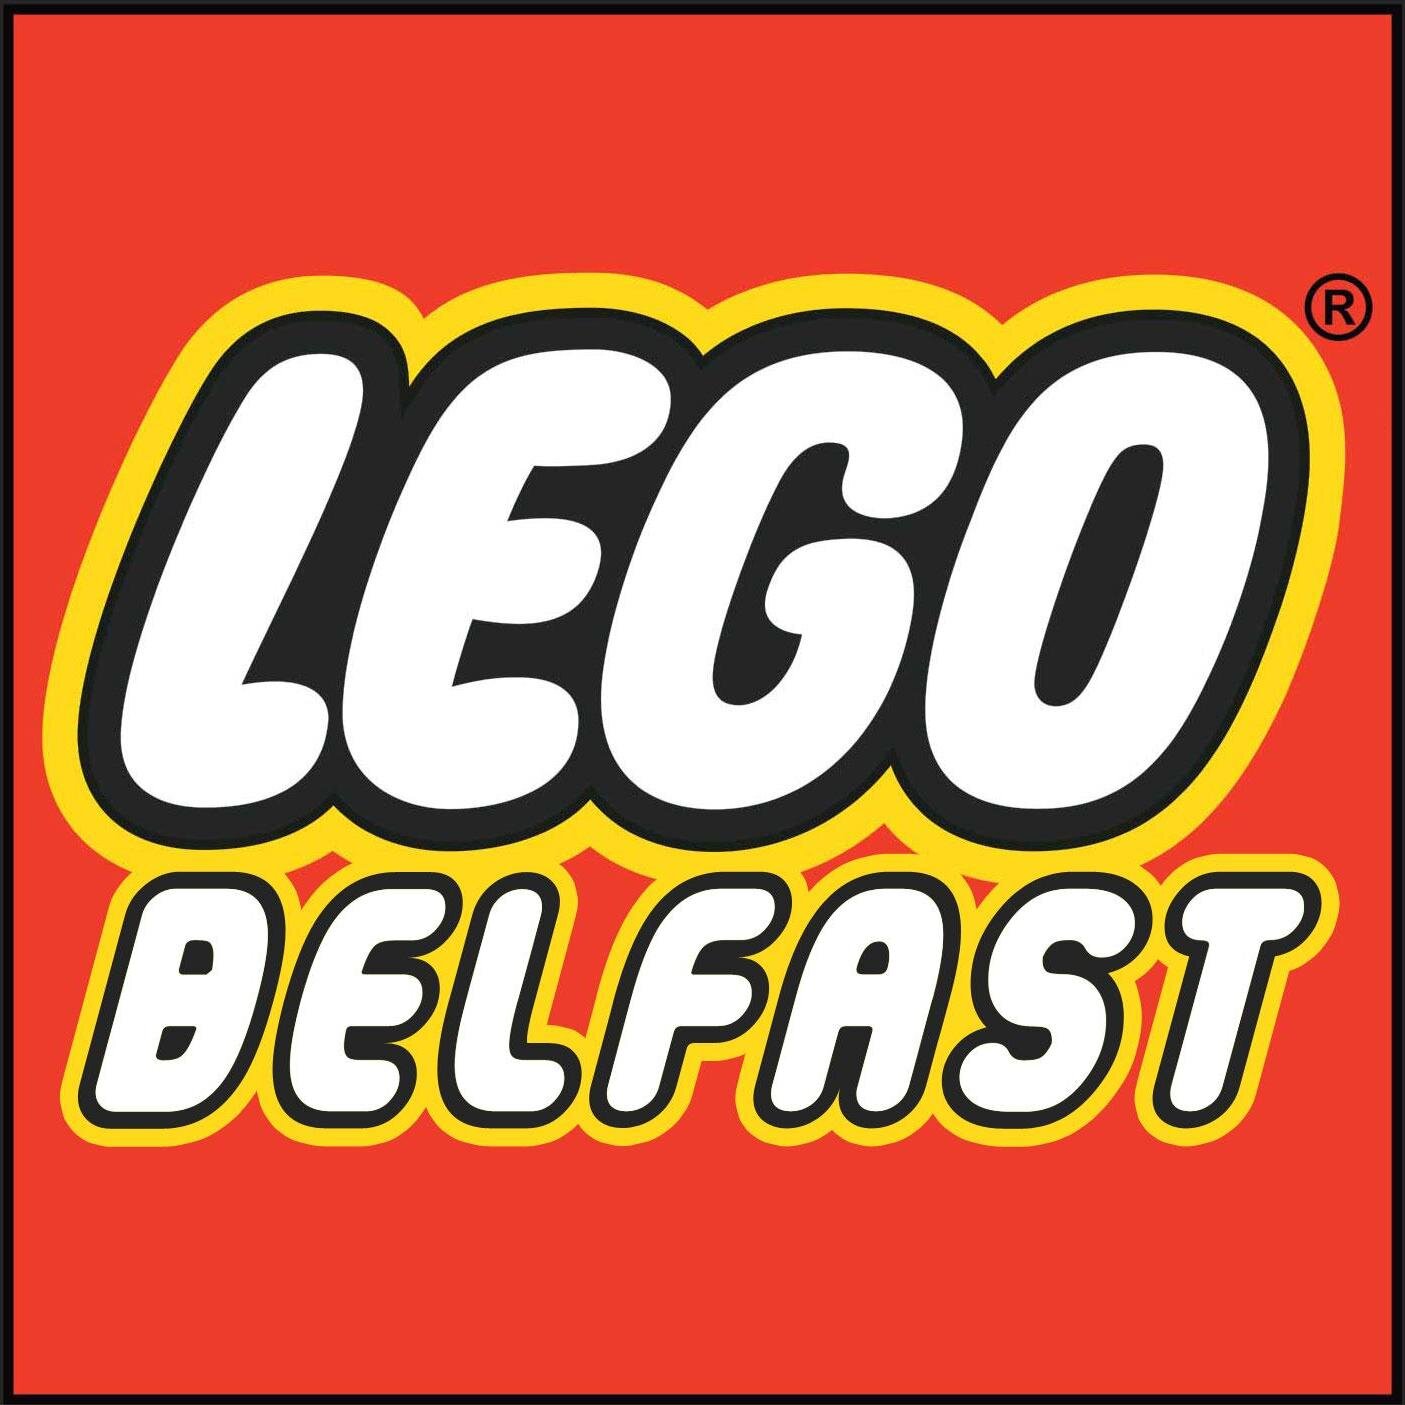 This twitter account is joint to a Facebook page to help show the want and need for a Lego Store to open in Belfast Northern Ireland.